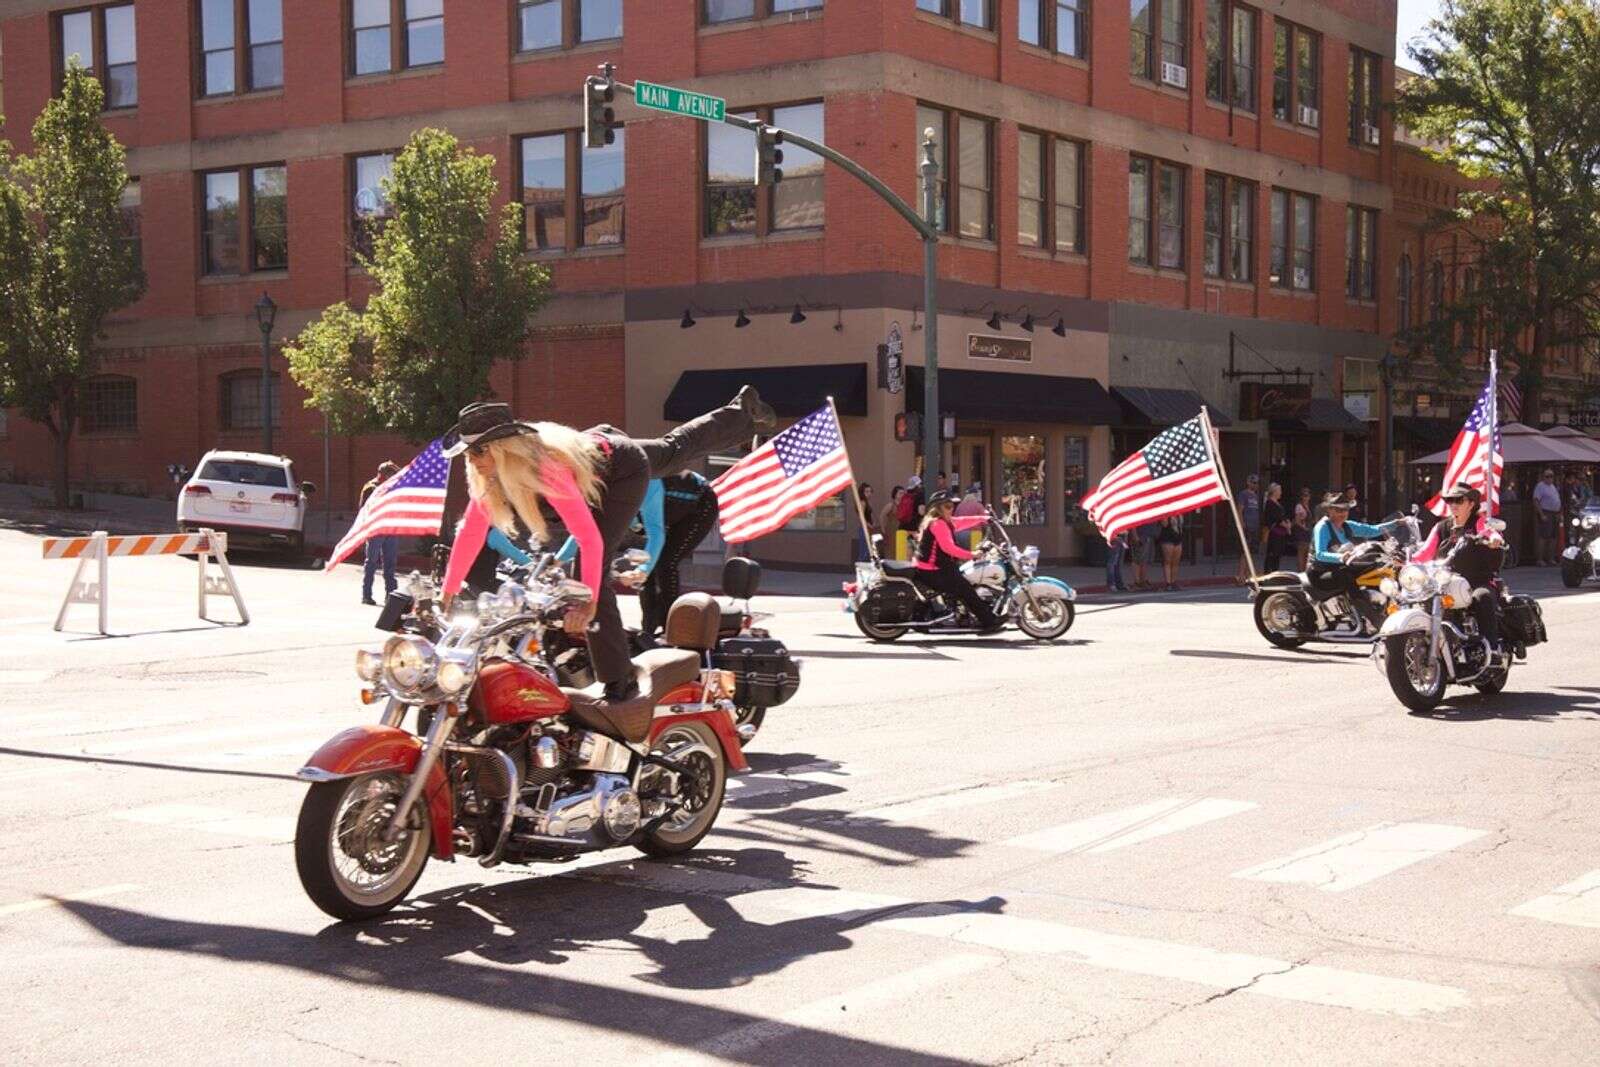 Motorcyclists show off their rides during parade in downtown Durango